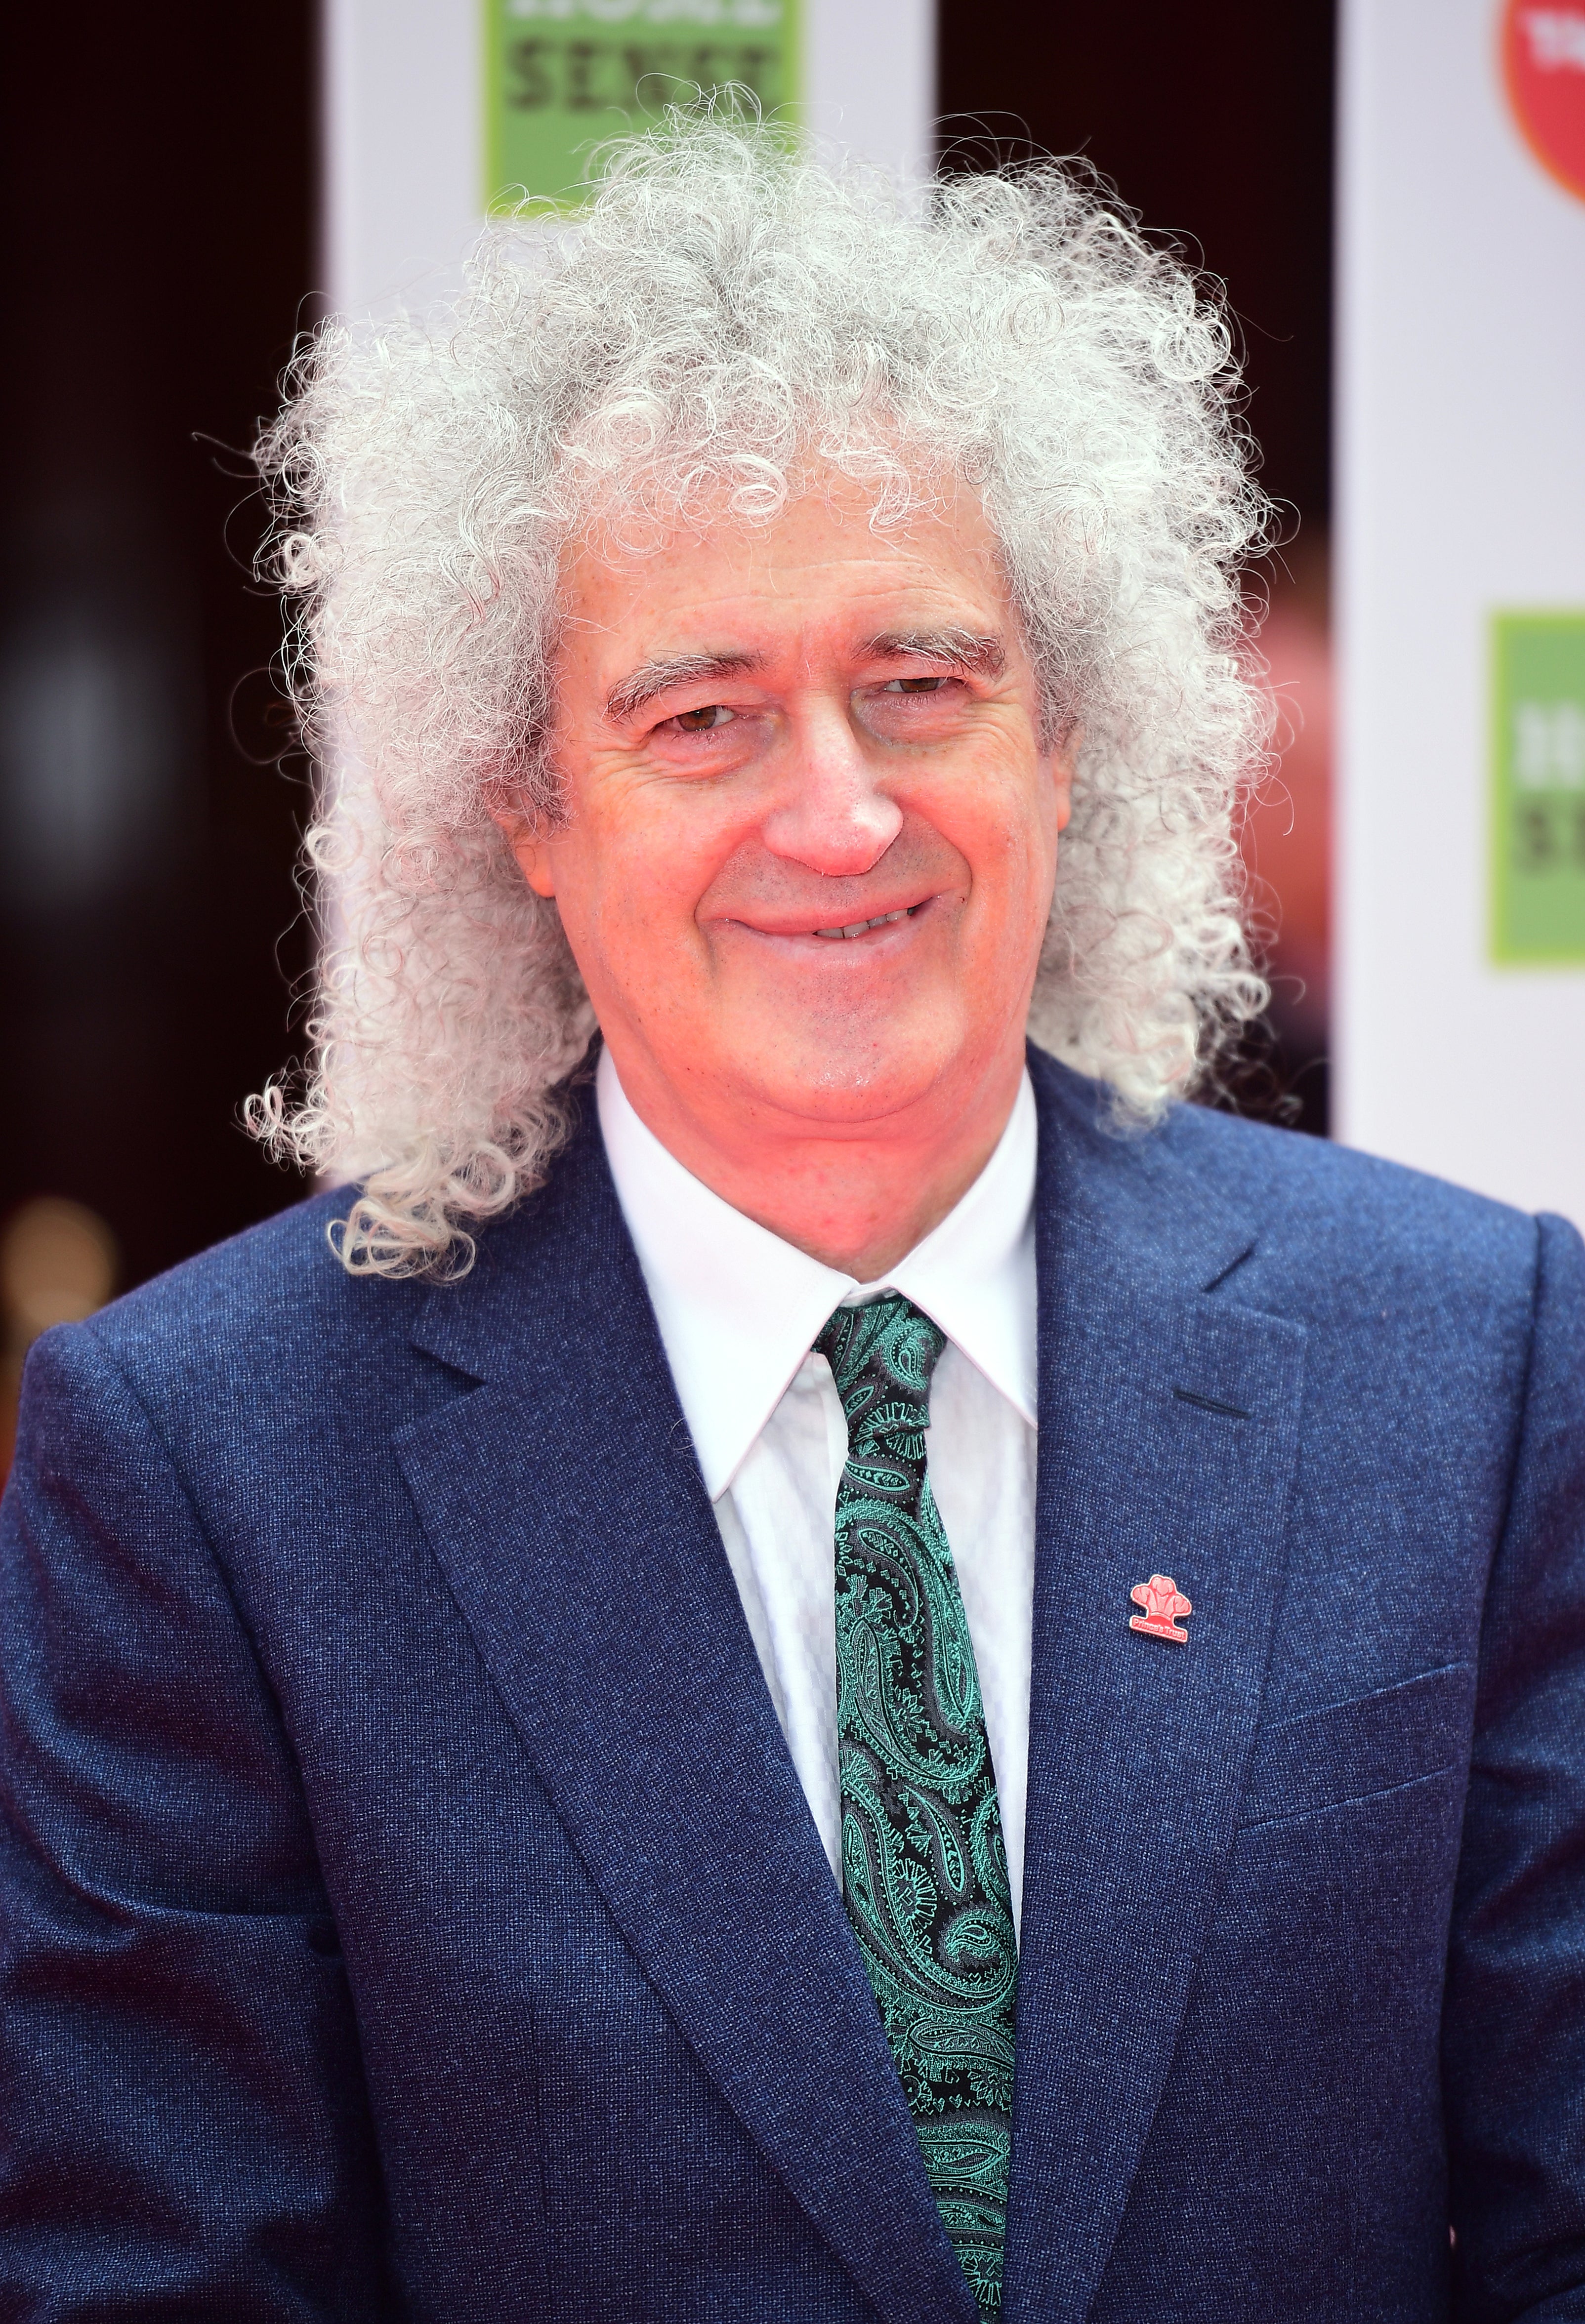 Brian May is “optimistic” about Covid-19 as he battles the virus in isolation (PA)